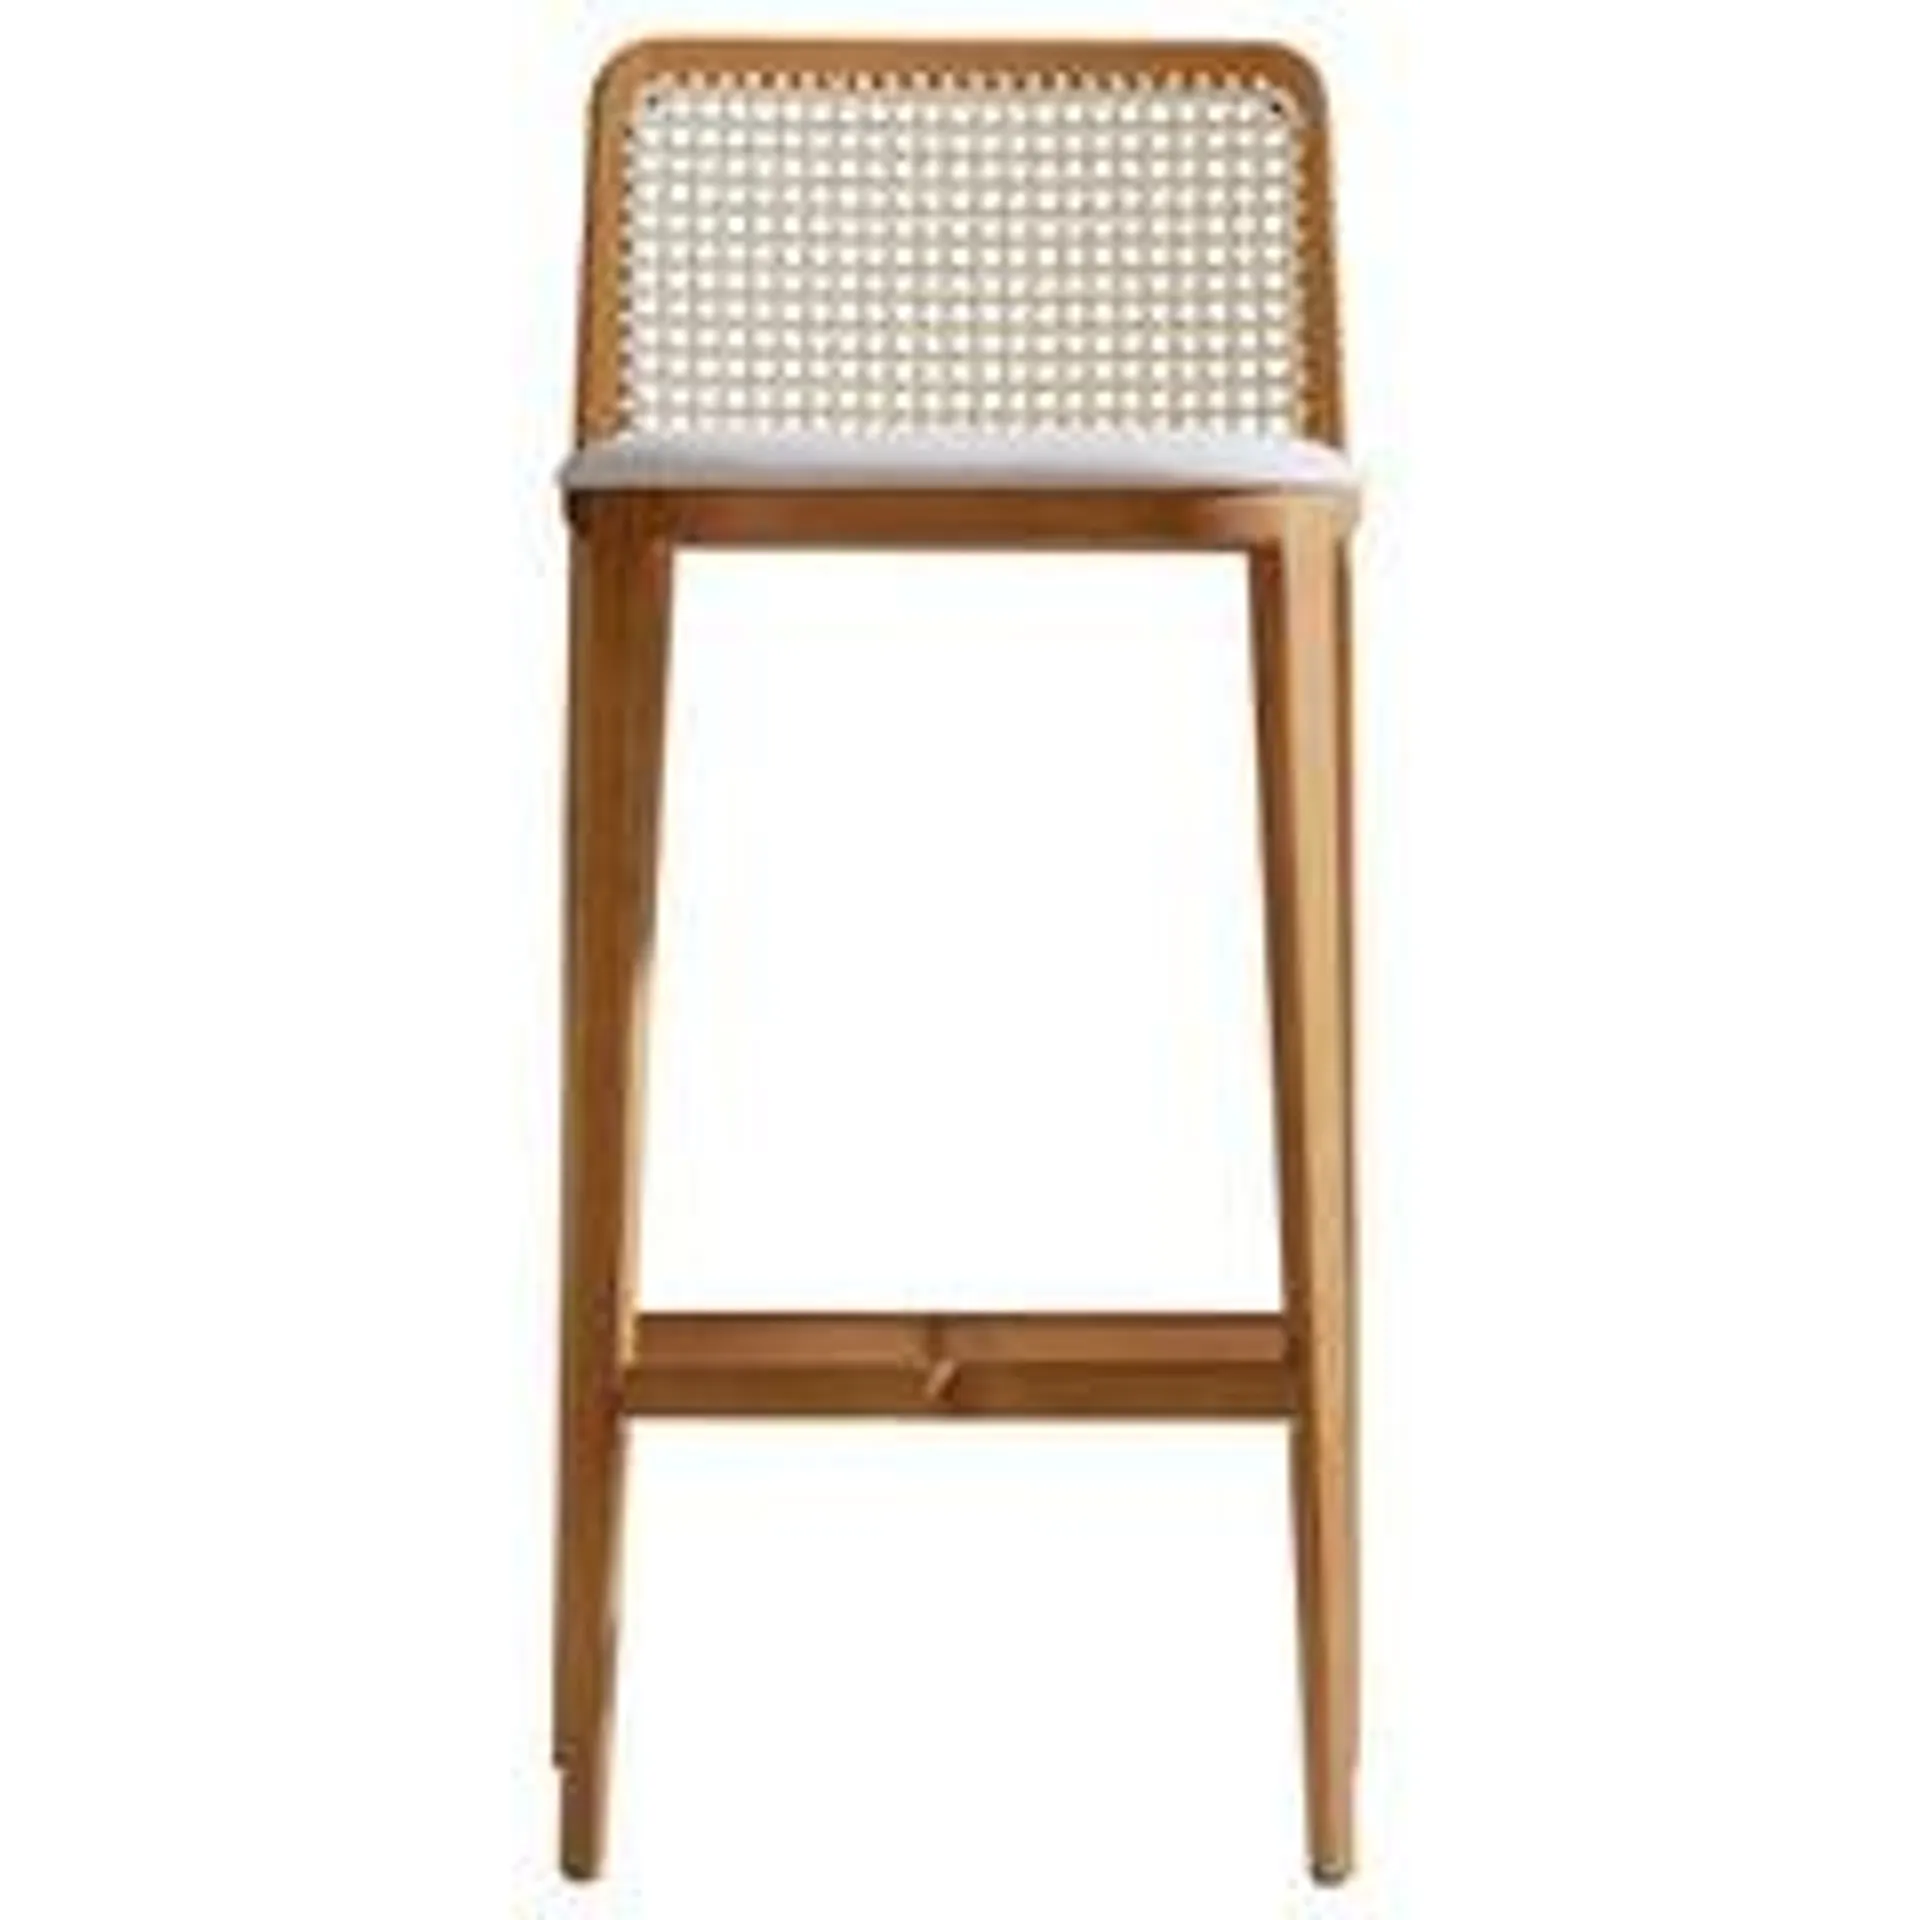 Minimal Style, Solid Wood Stool, Textiles or Leather Seatings, Caning Backboard